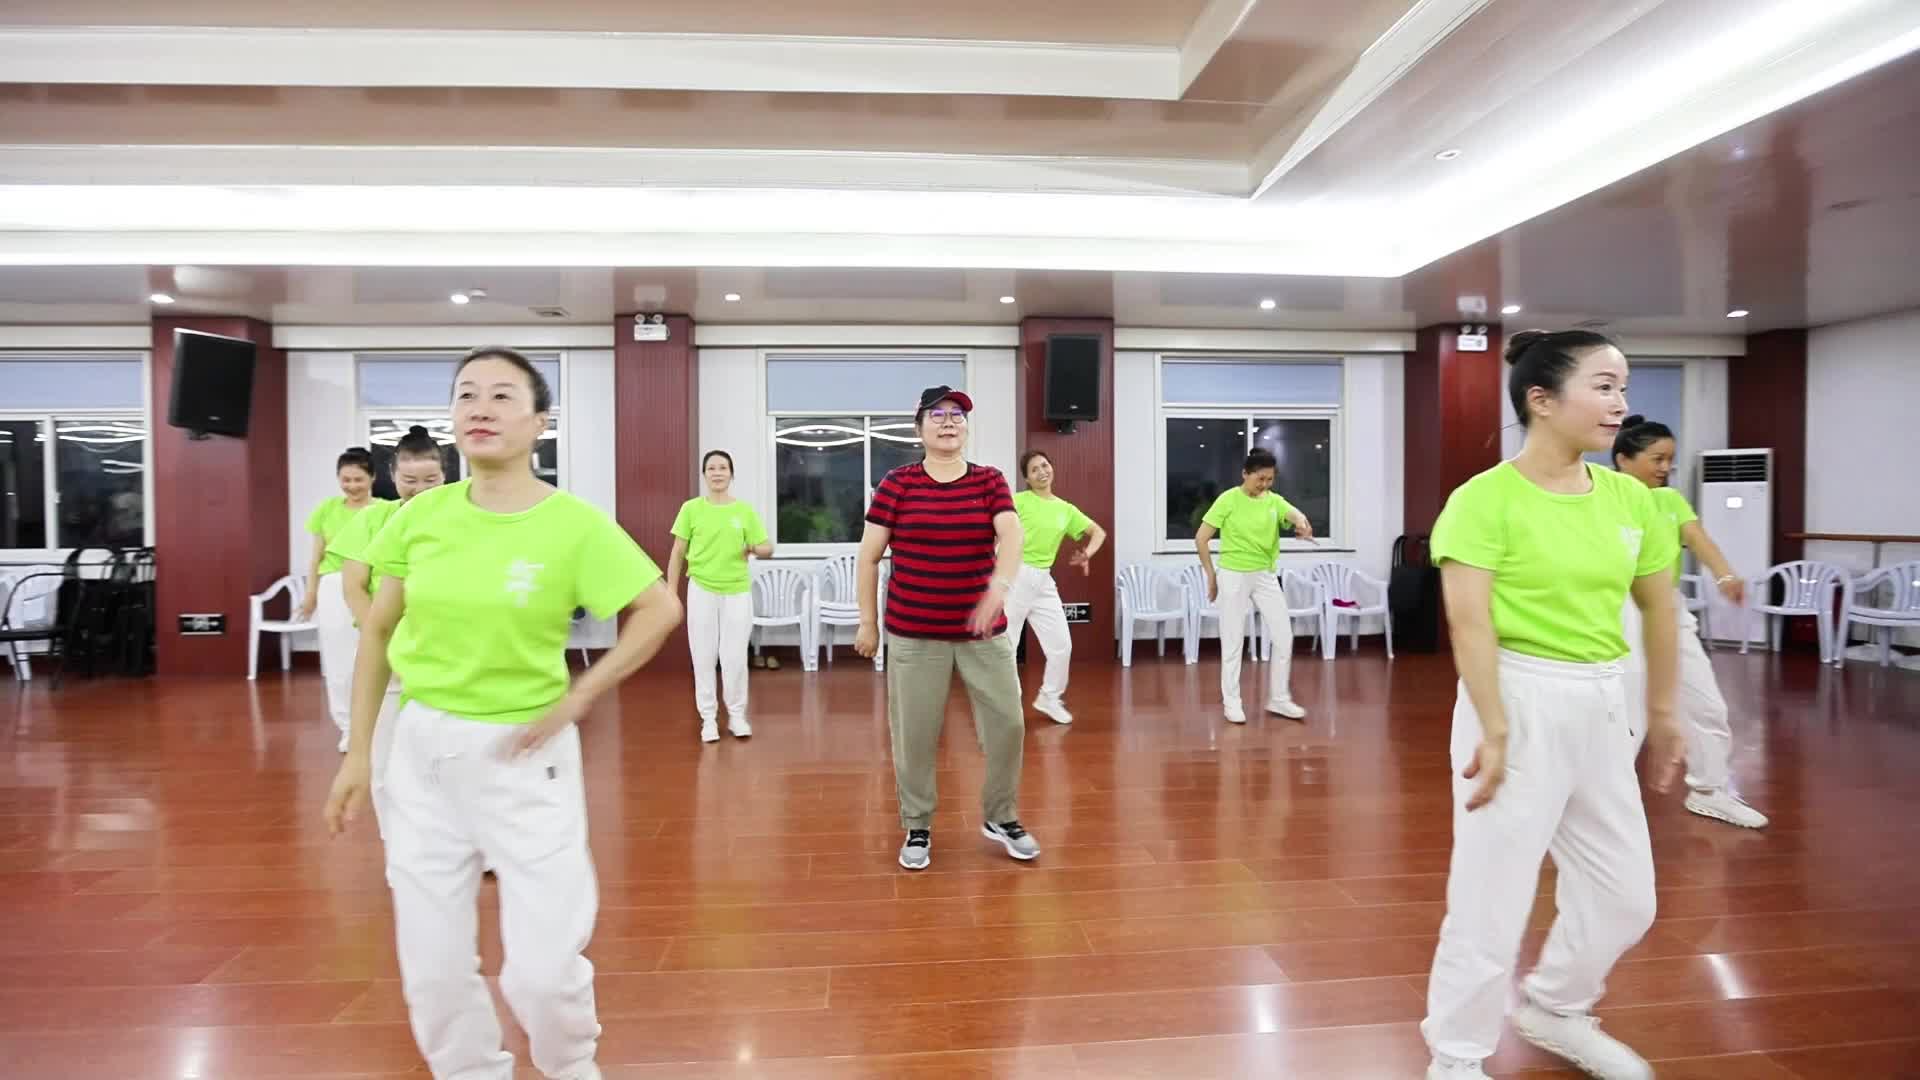 Discover how Xiaoshan's middle-aged residents stay energetic and active